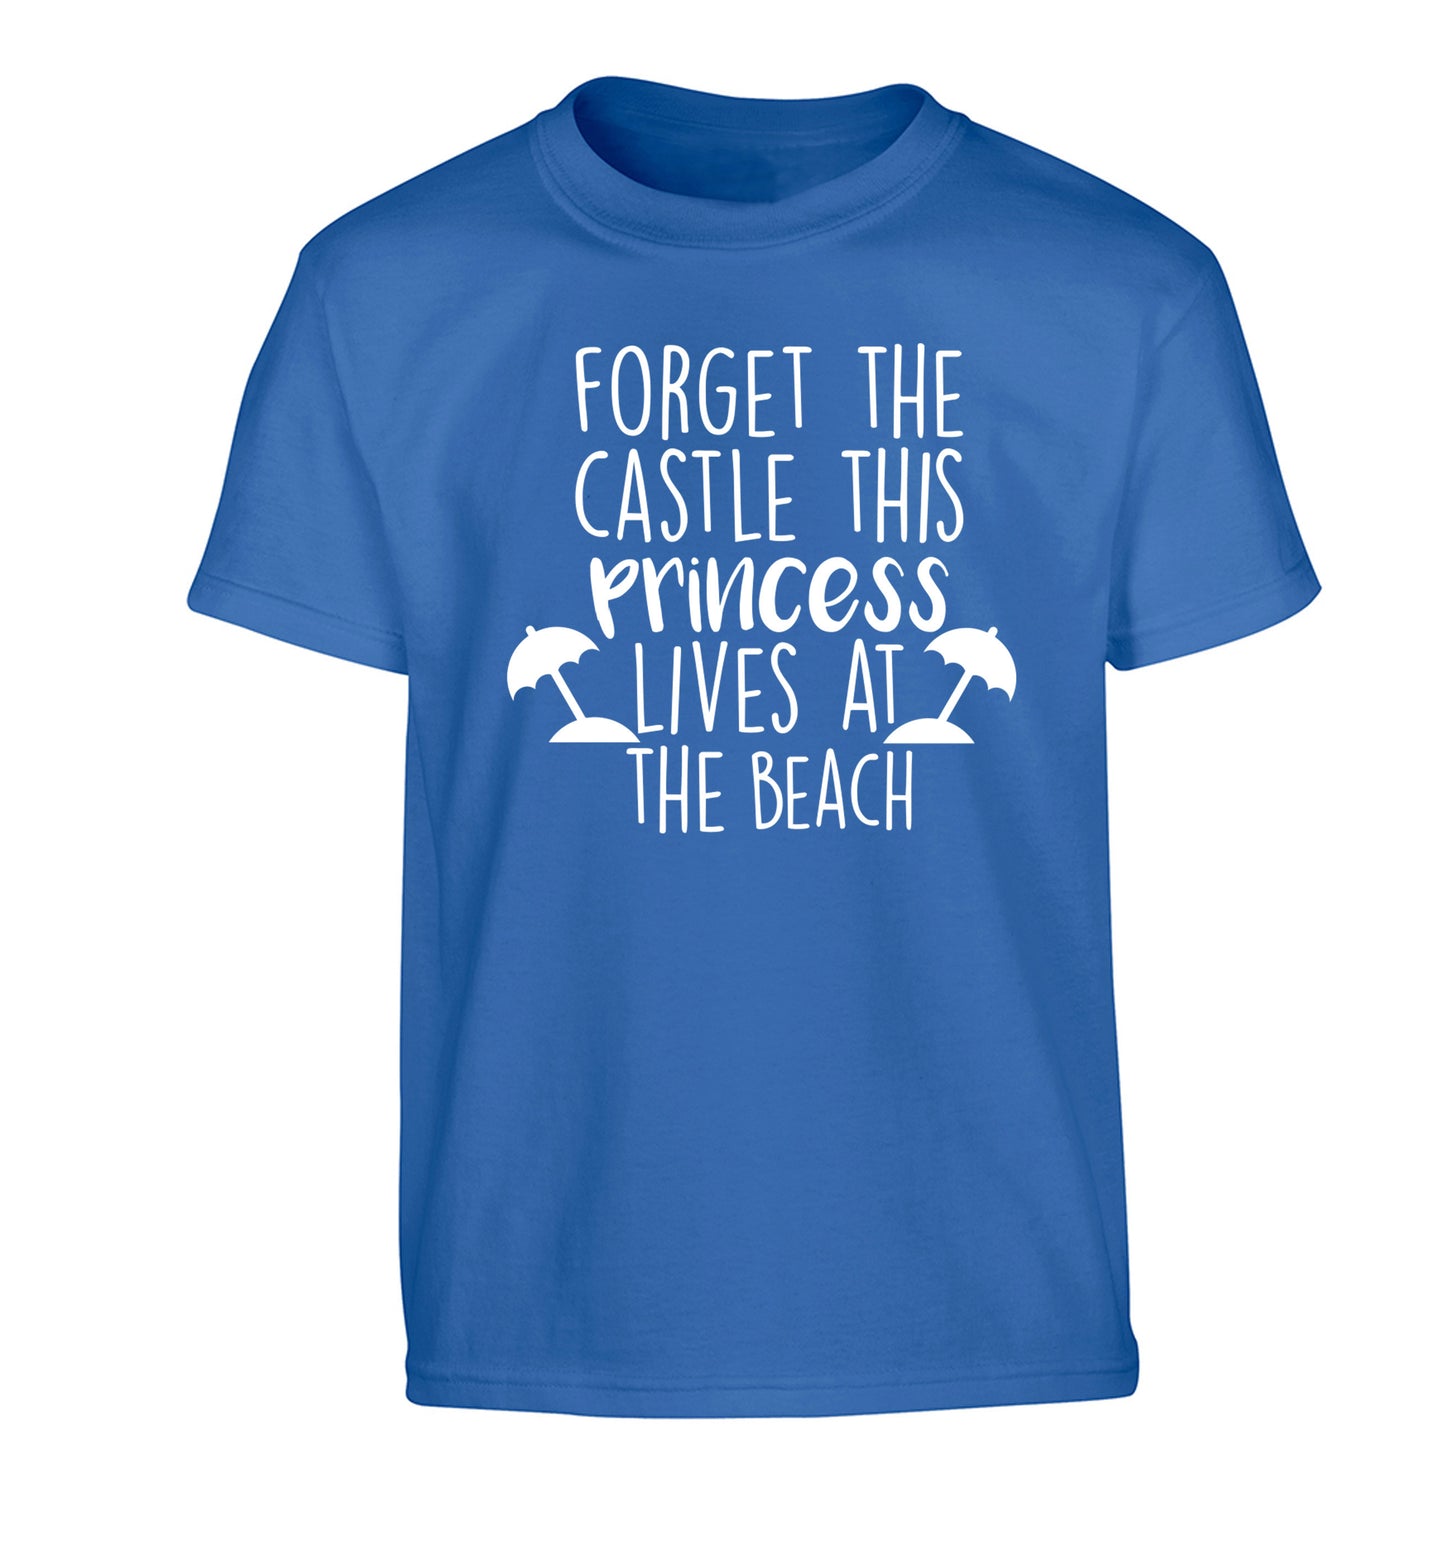 Forget the castle this princess lives at the beach Children's blue Tshirt 12-14 Years